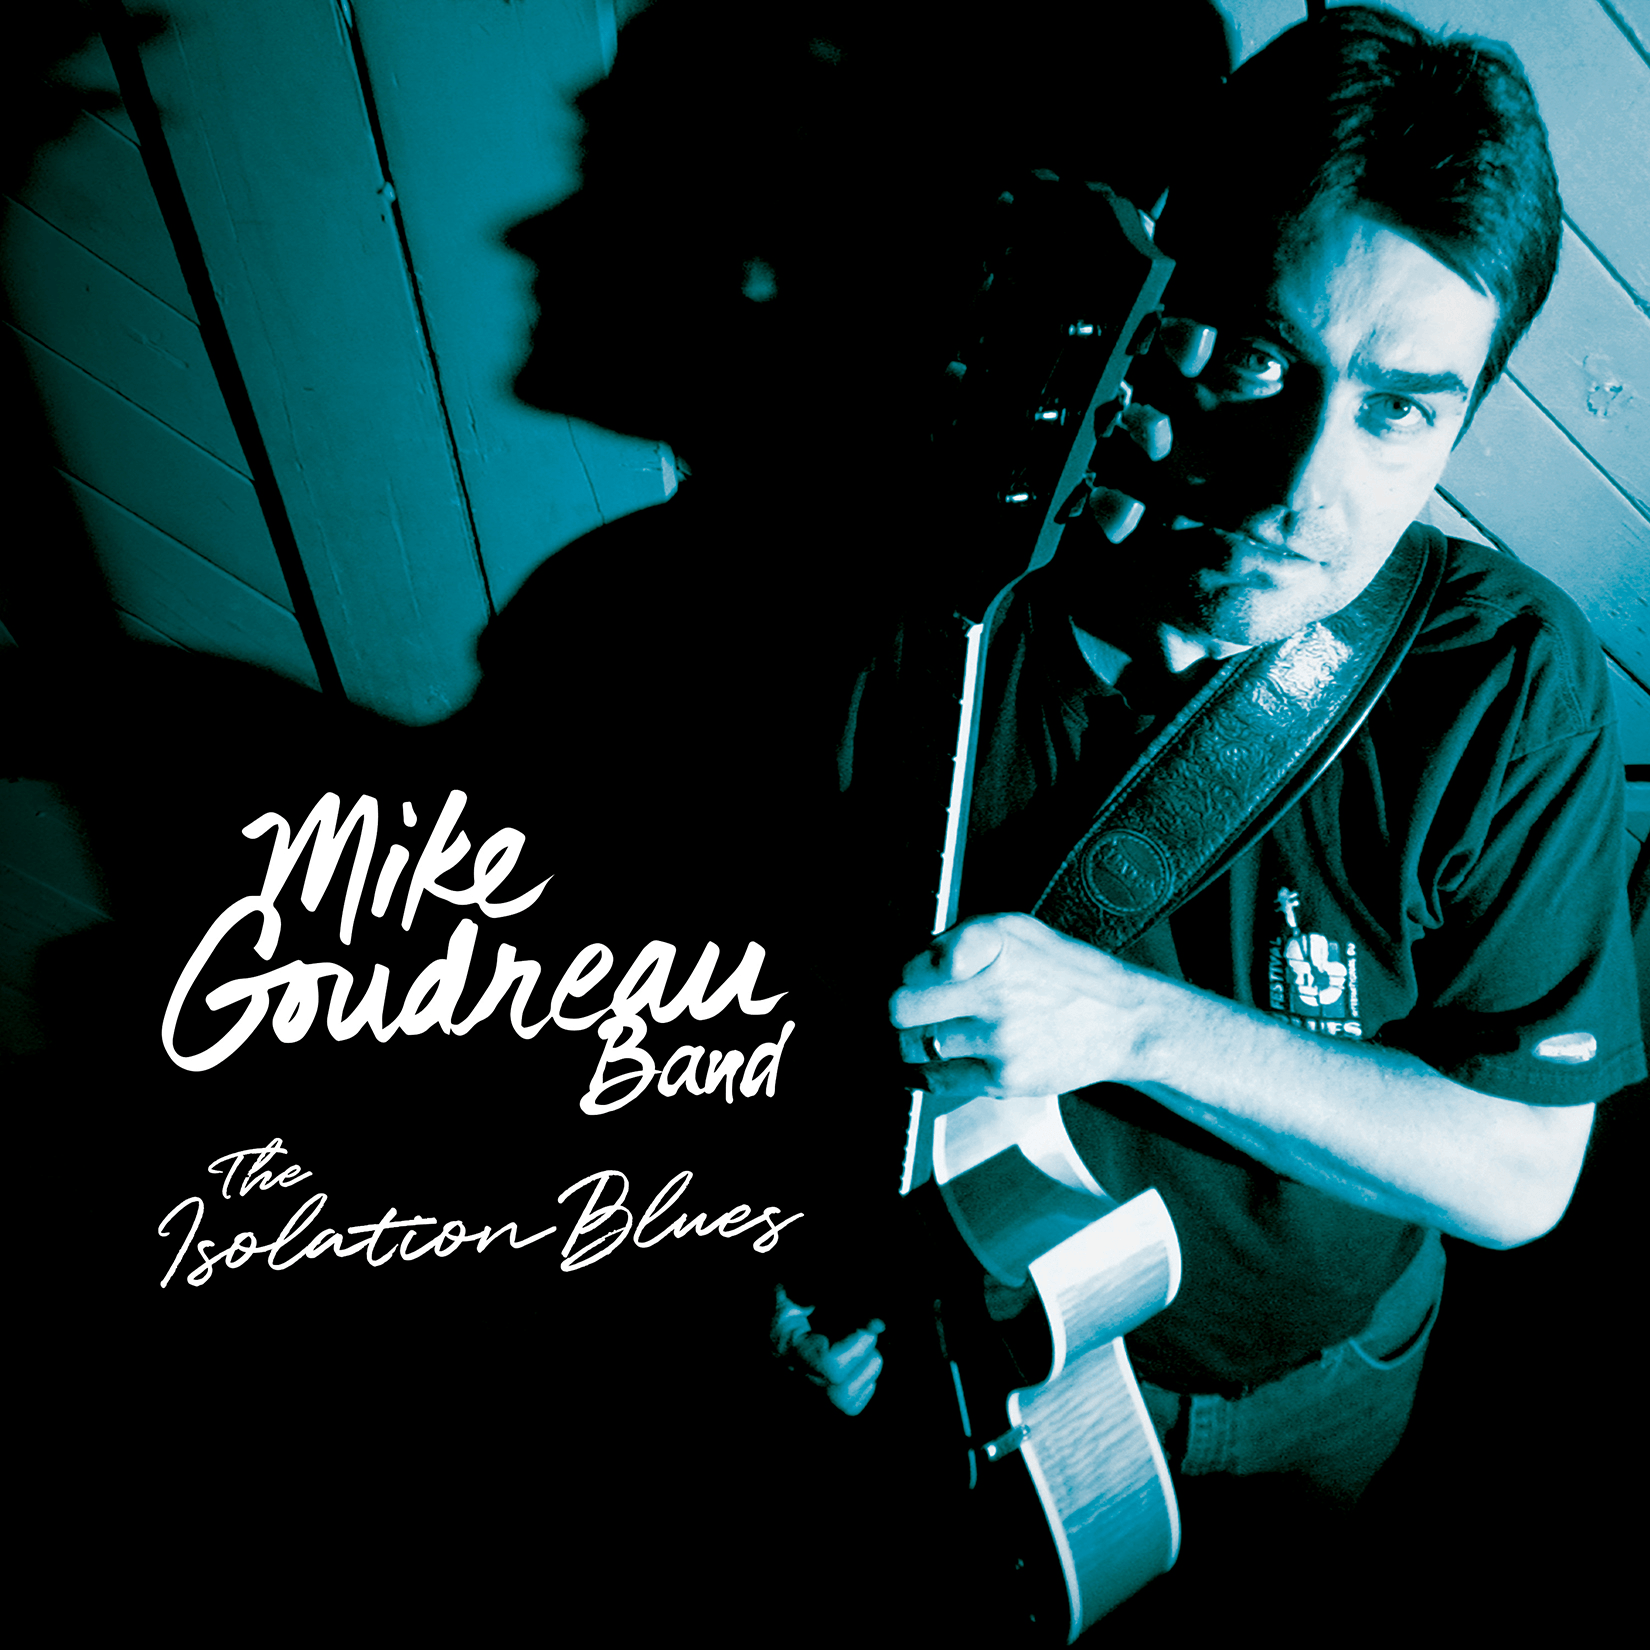 Album cover of Mike Goudreau Band's  The Isolation Blues contains a man holding a guitar